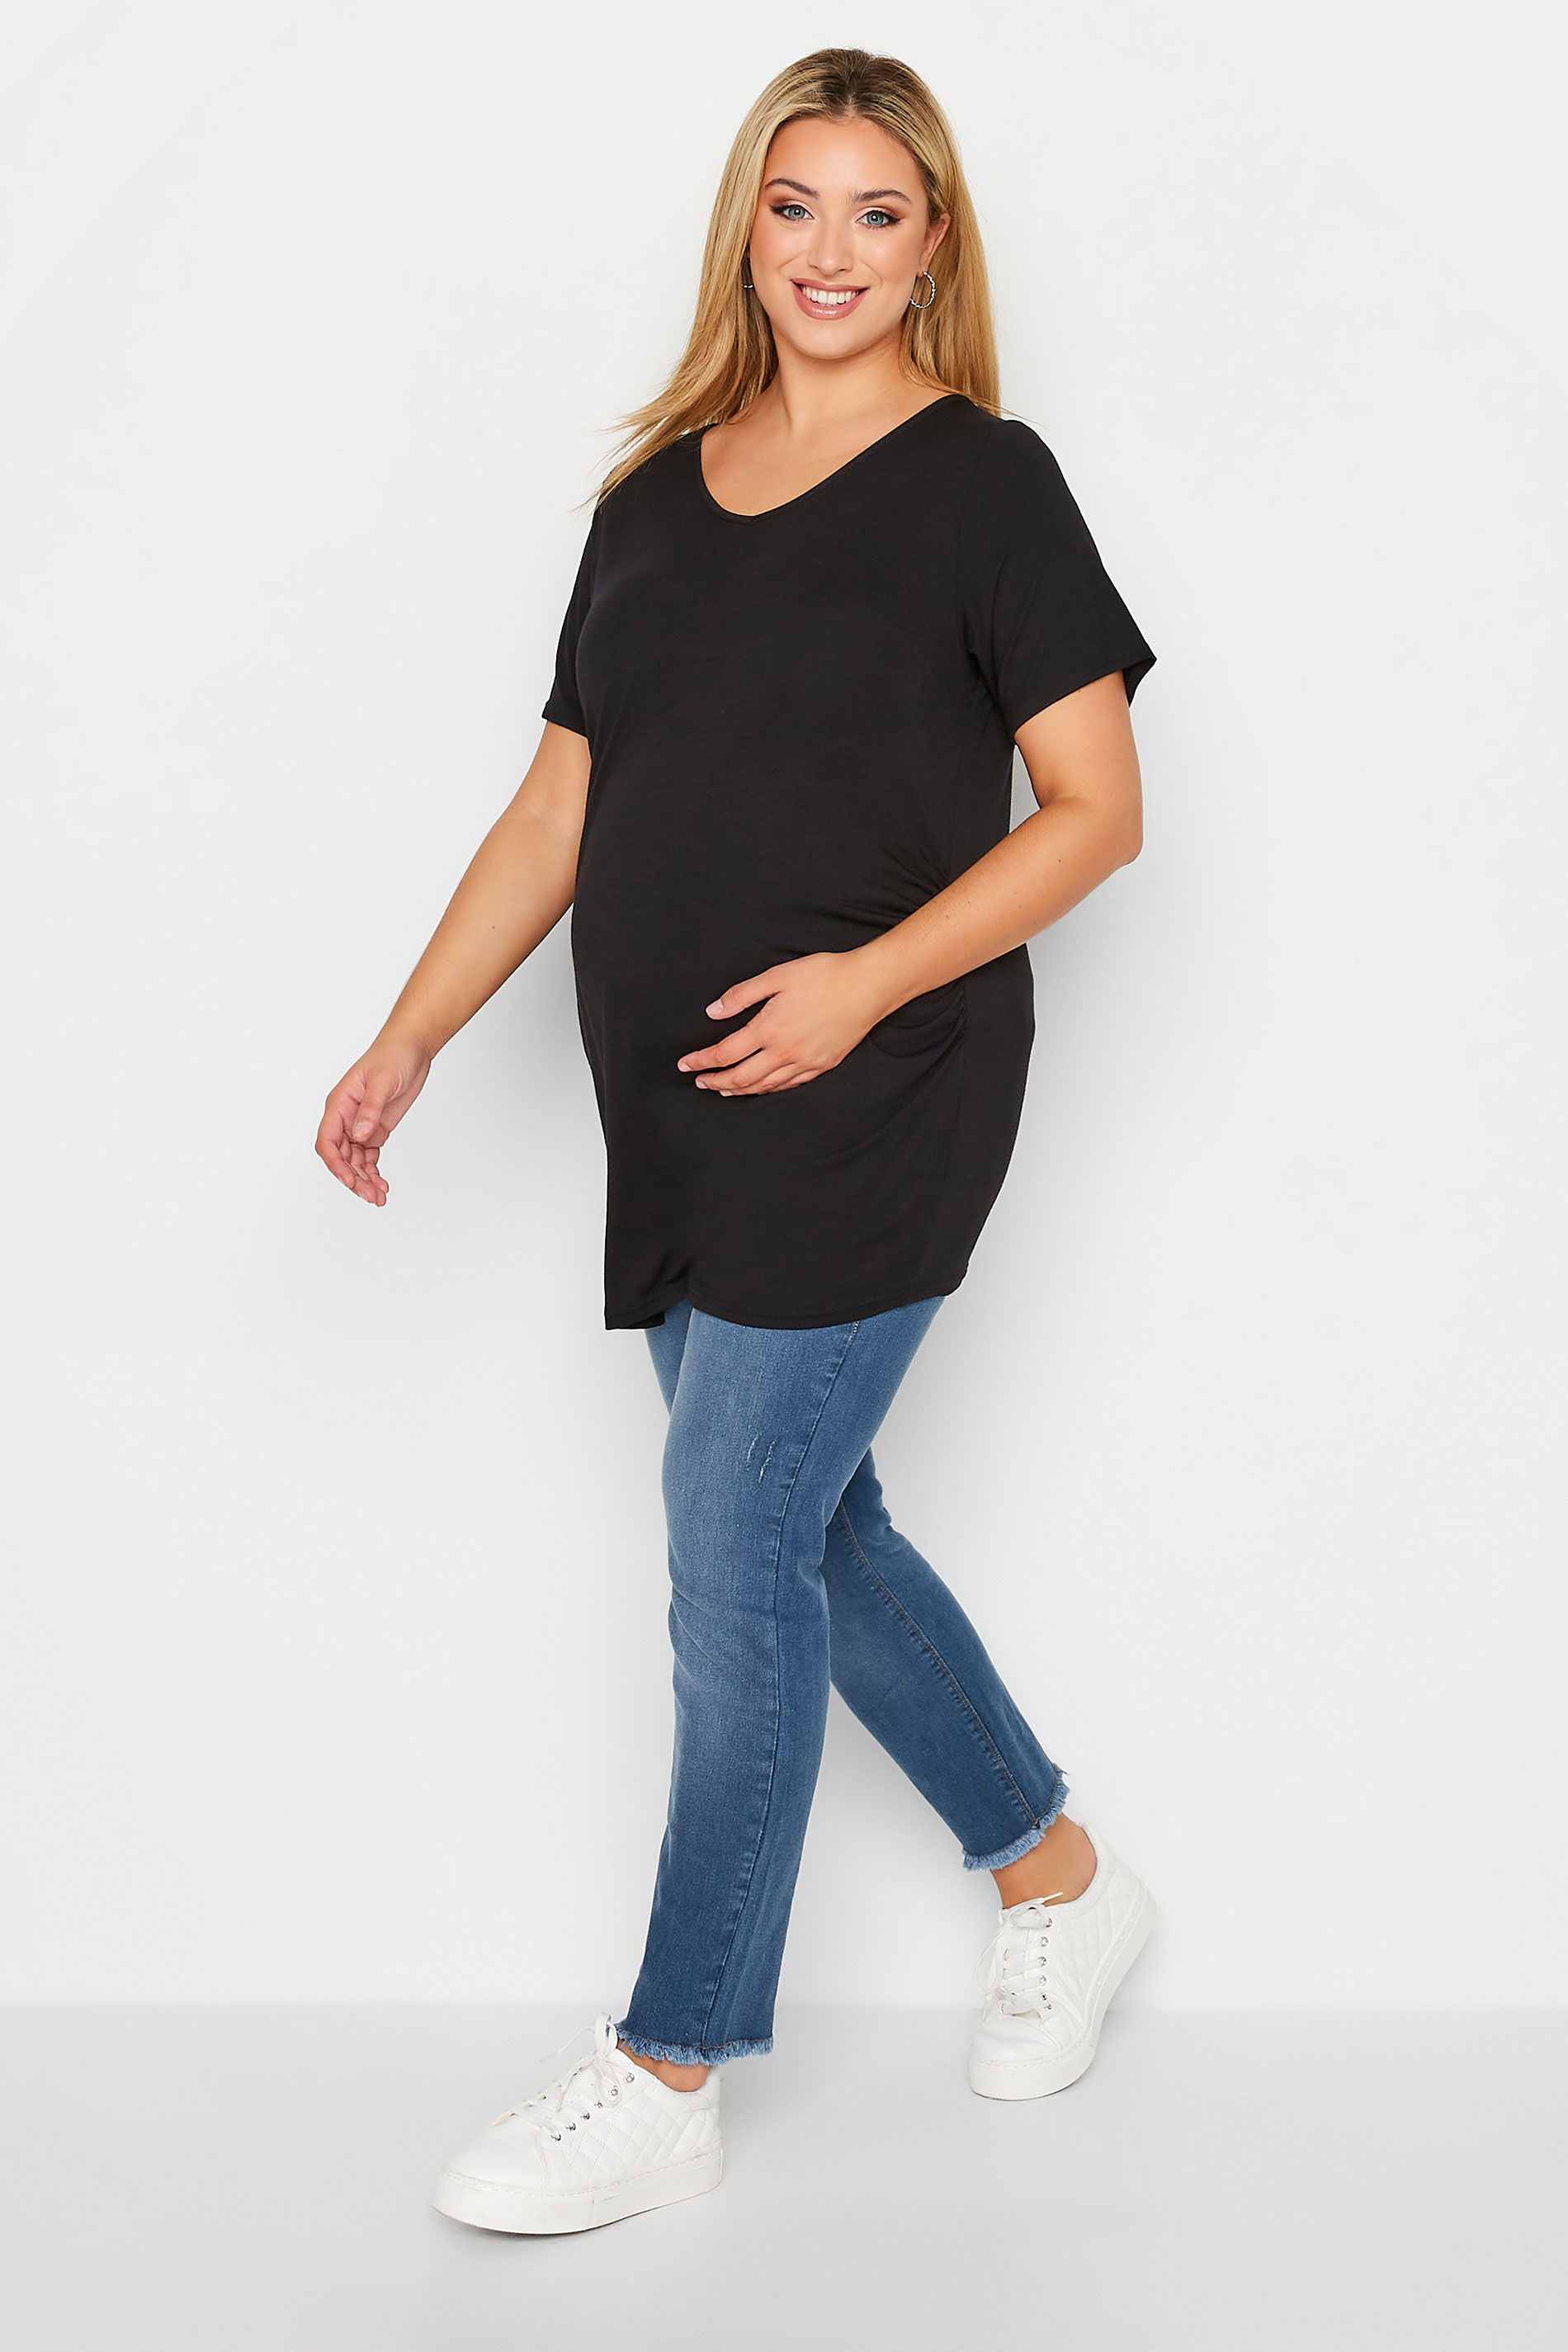 BUMP IT UP MATERNITY Plus Size Blue Push Up AVA Jeans | Yours Clothing 2